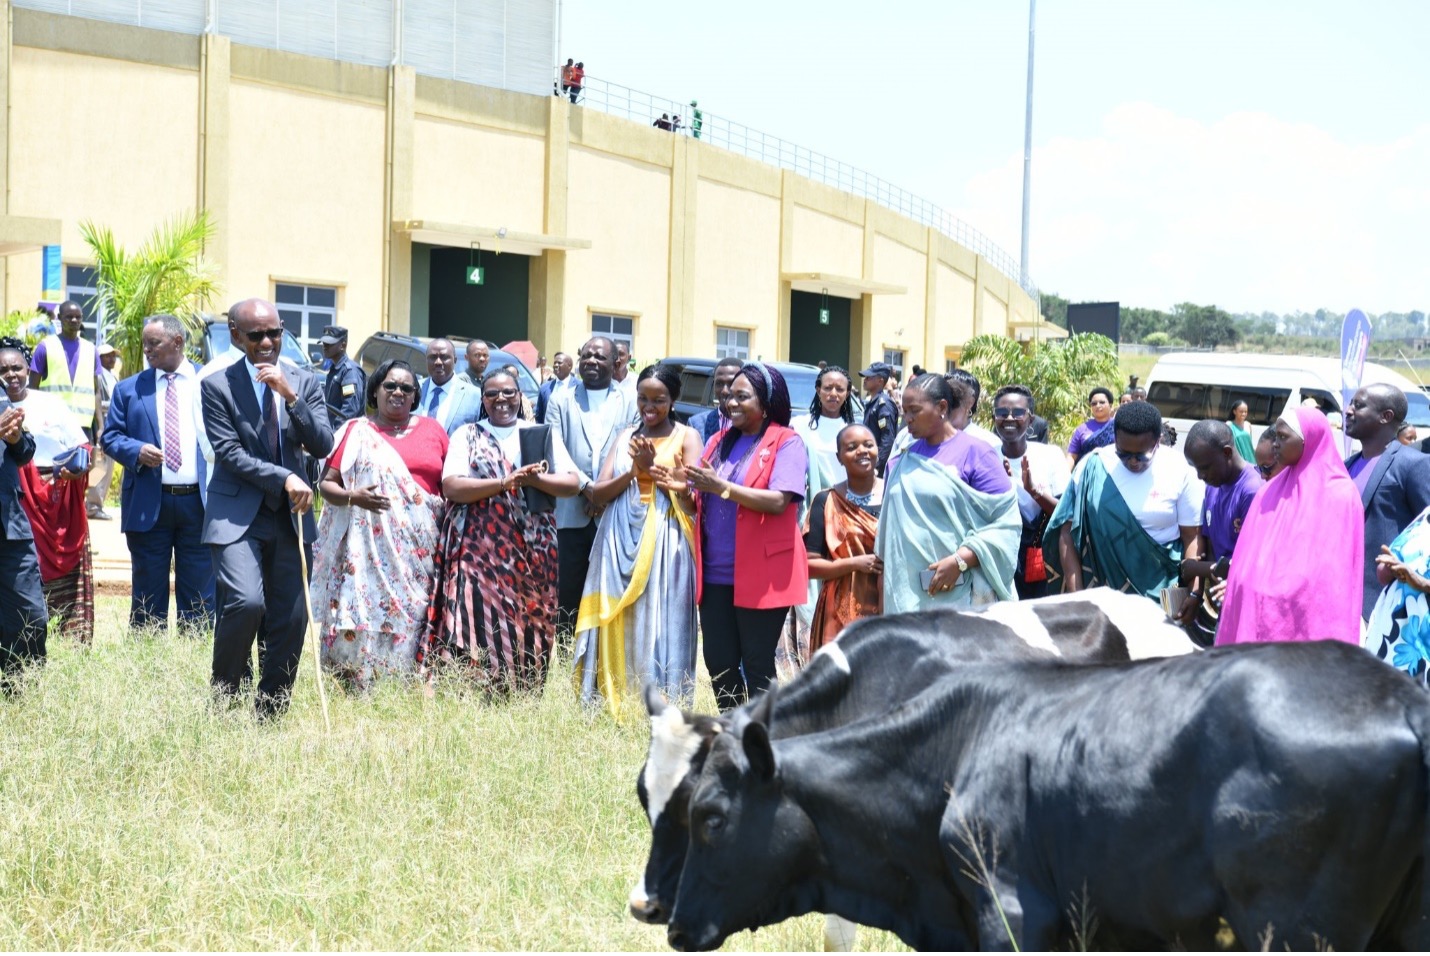 The Mayor of Nyagatare district and delegates handing over the livestock to selected families at the IWD celebrations. Photo: UN Women/Pearl Karungi